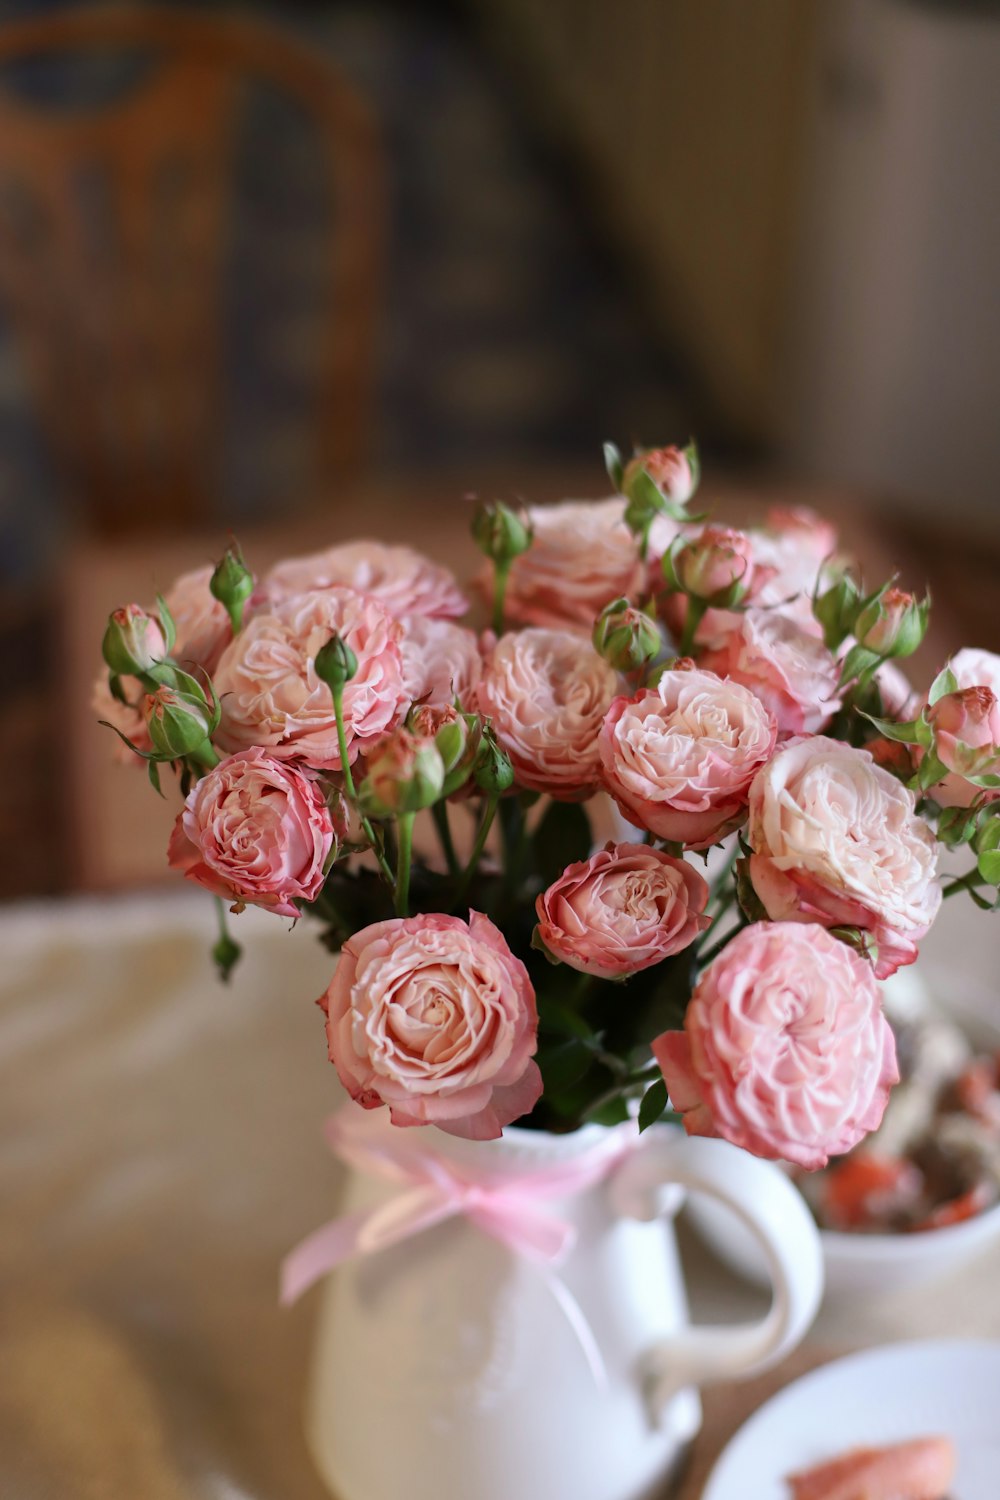 a vase of pink roses on a table